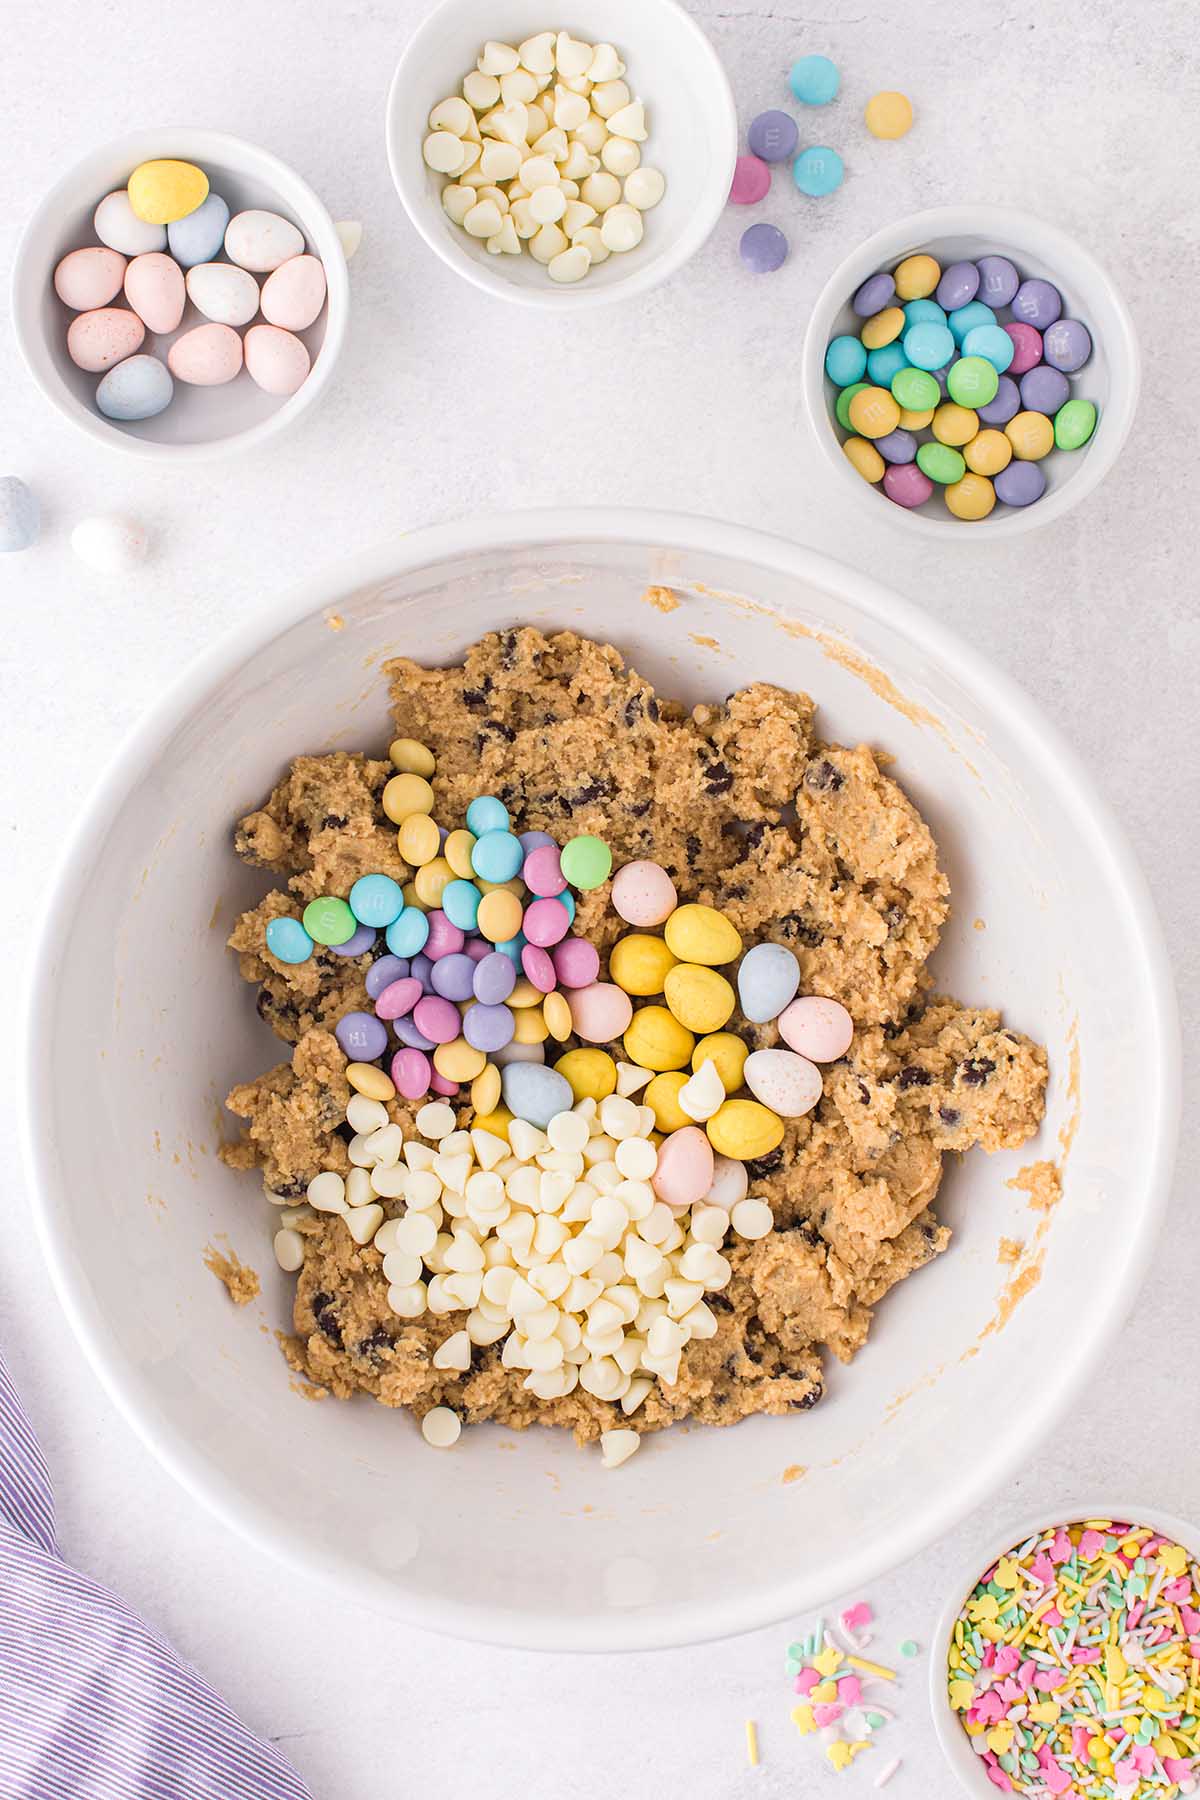 fold in the eggs, M&M's and chocolate chips